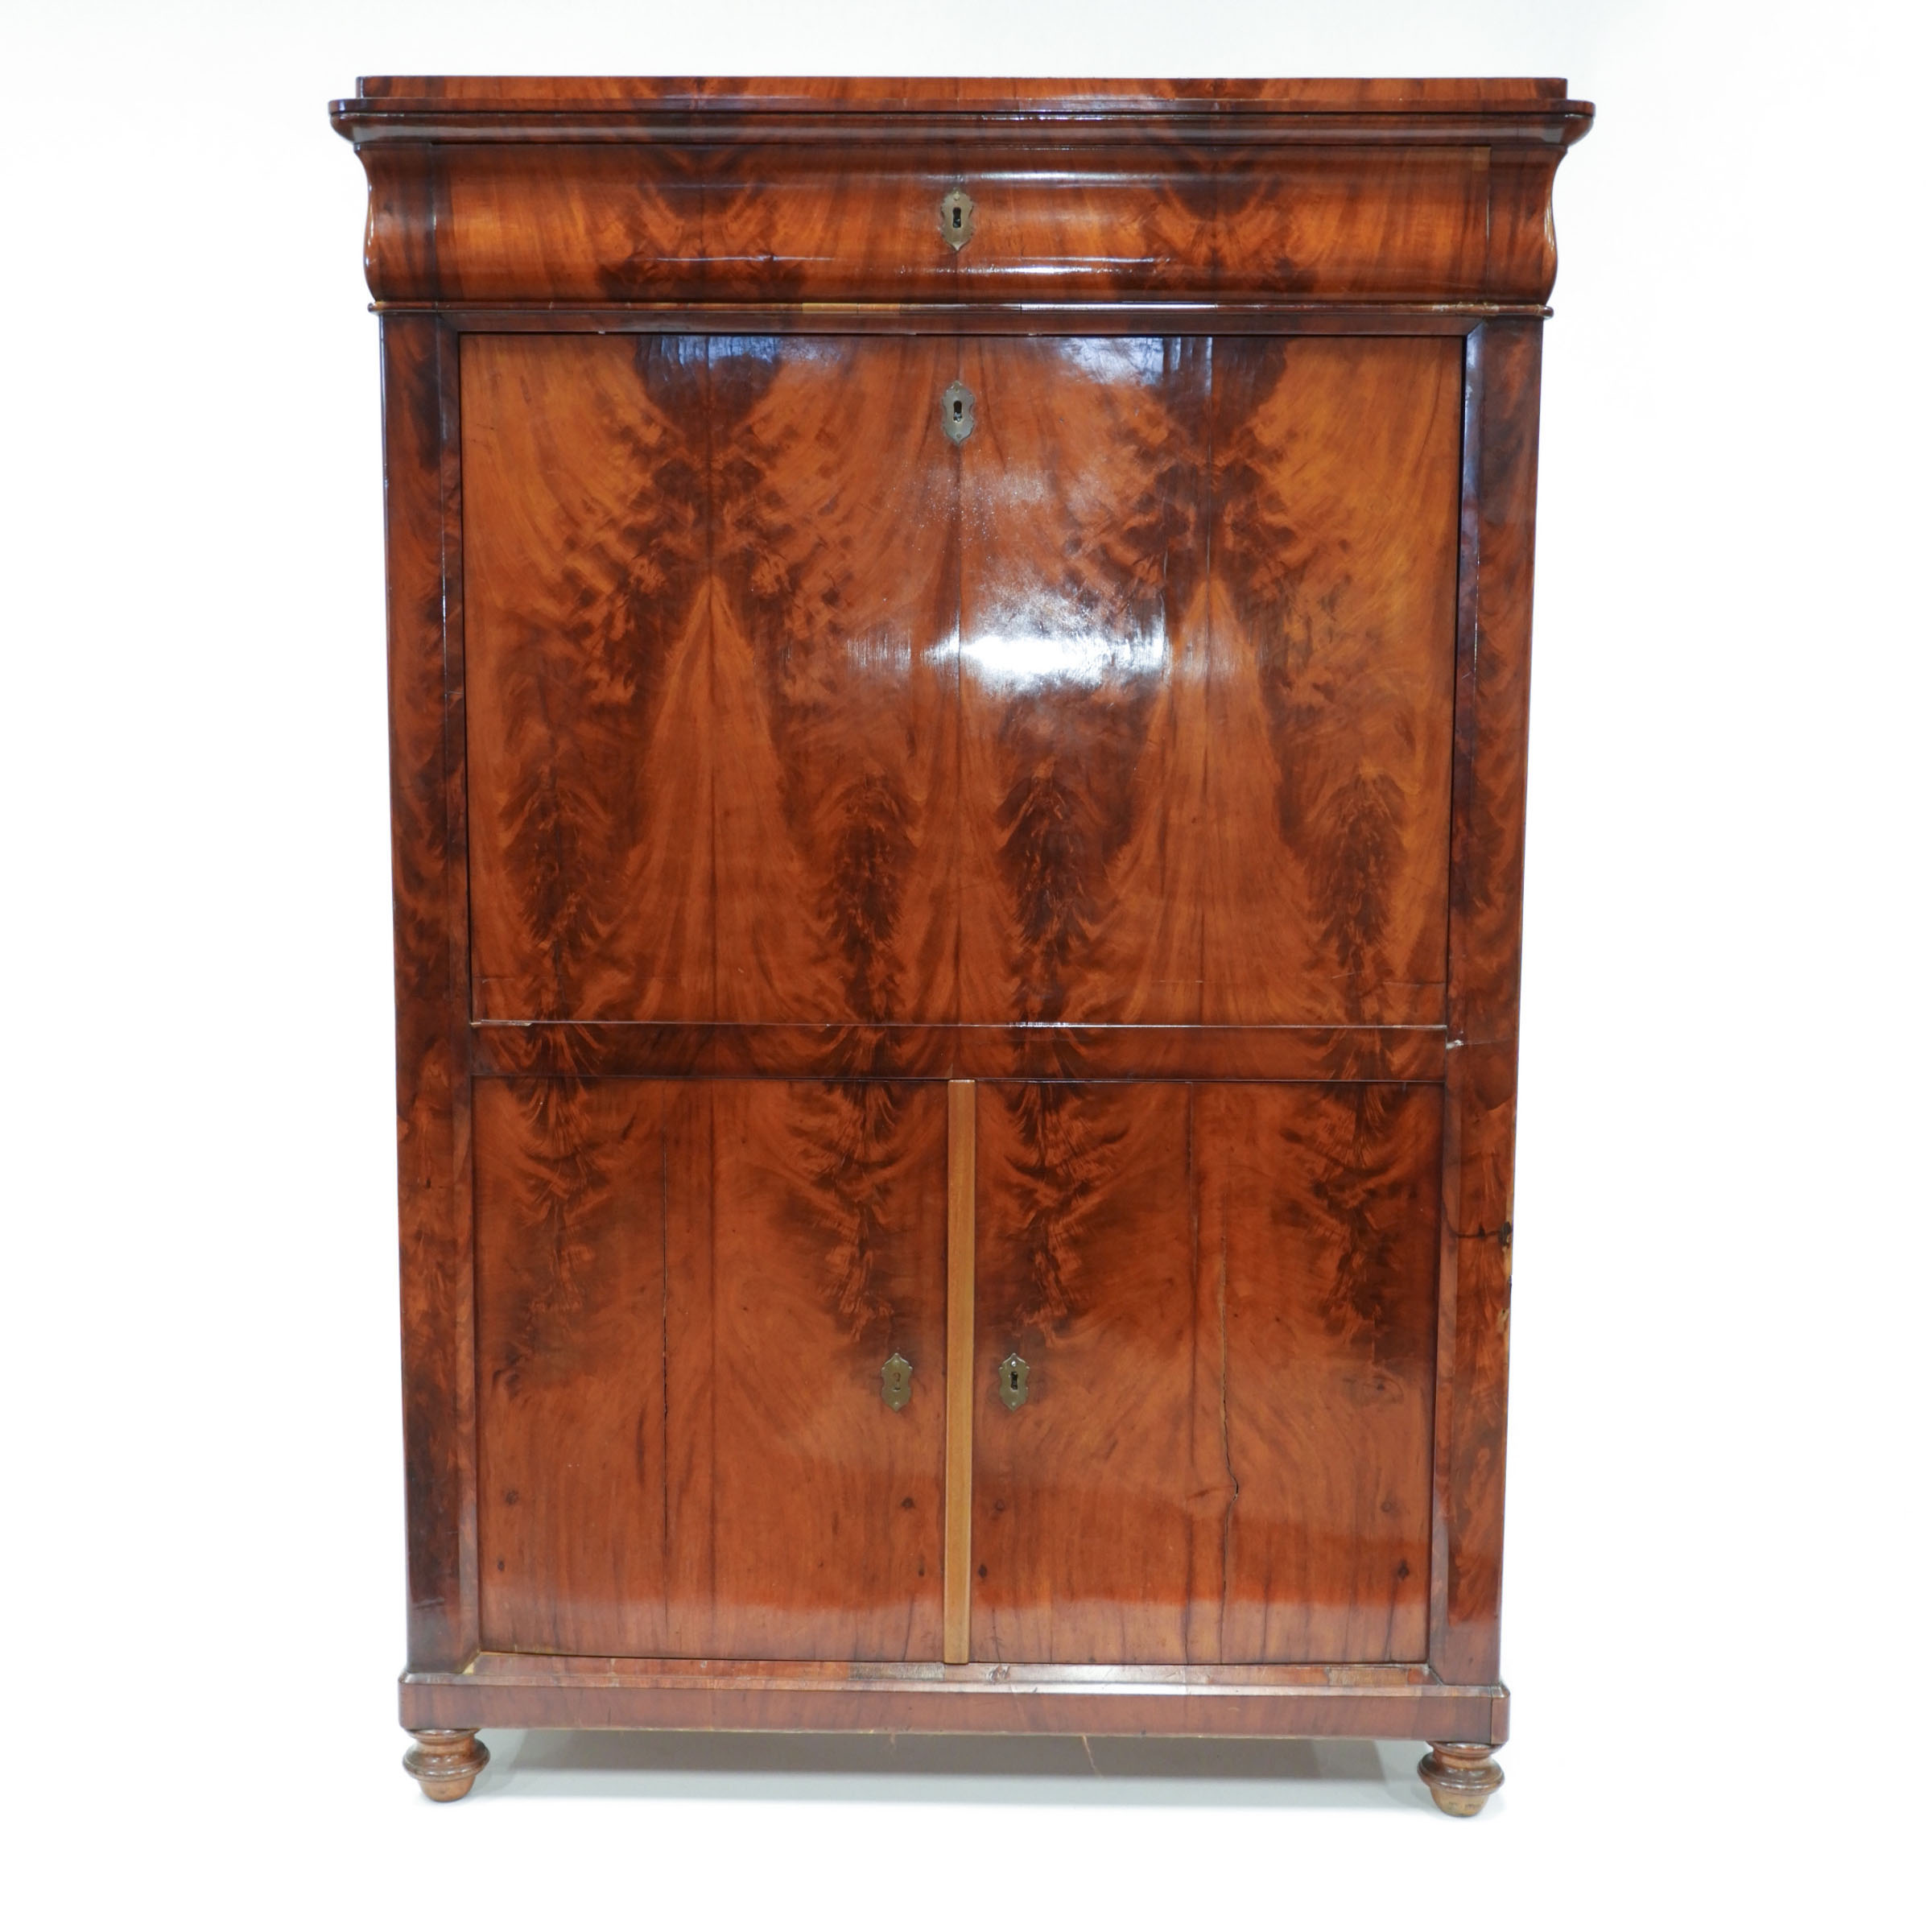 French Flame Mahogany Secretaire Abattant, 19th century and later